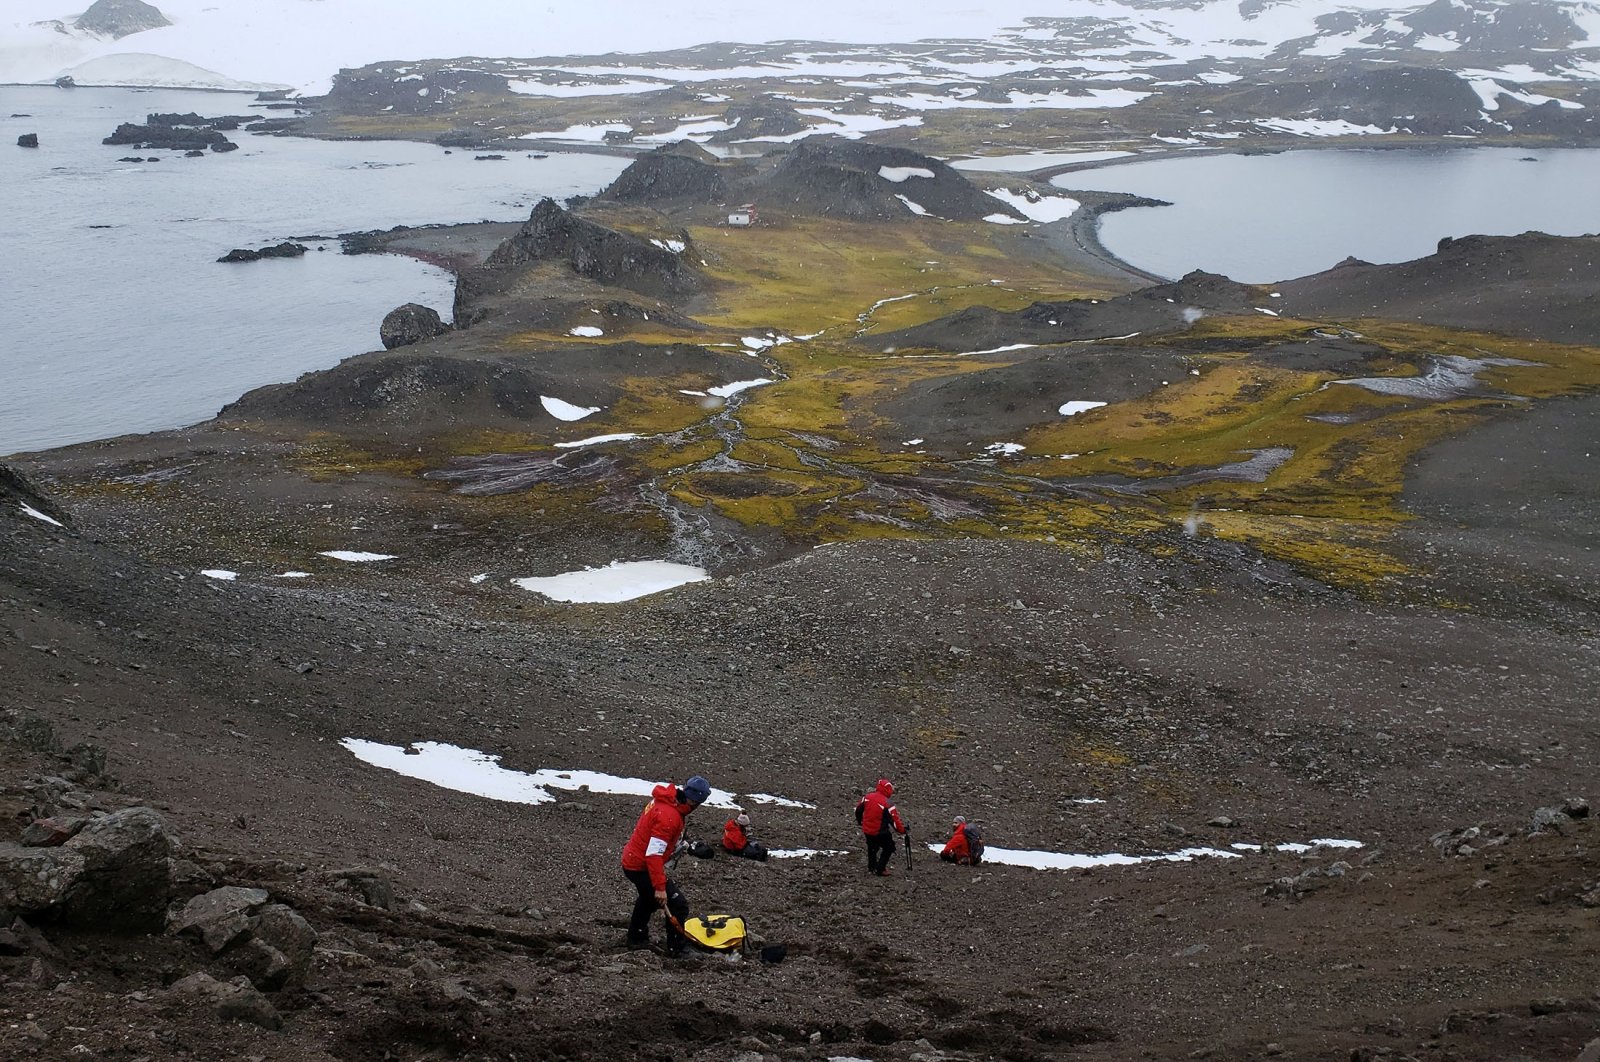 Scientists from the University of Chile collect organic material as they look for a bacteria discovered in Antarctica, Jan. 13, 2019. (Reuters Photo)